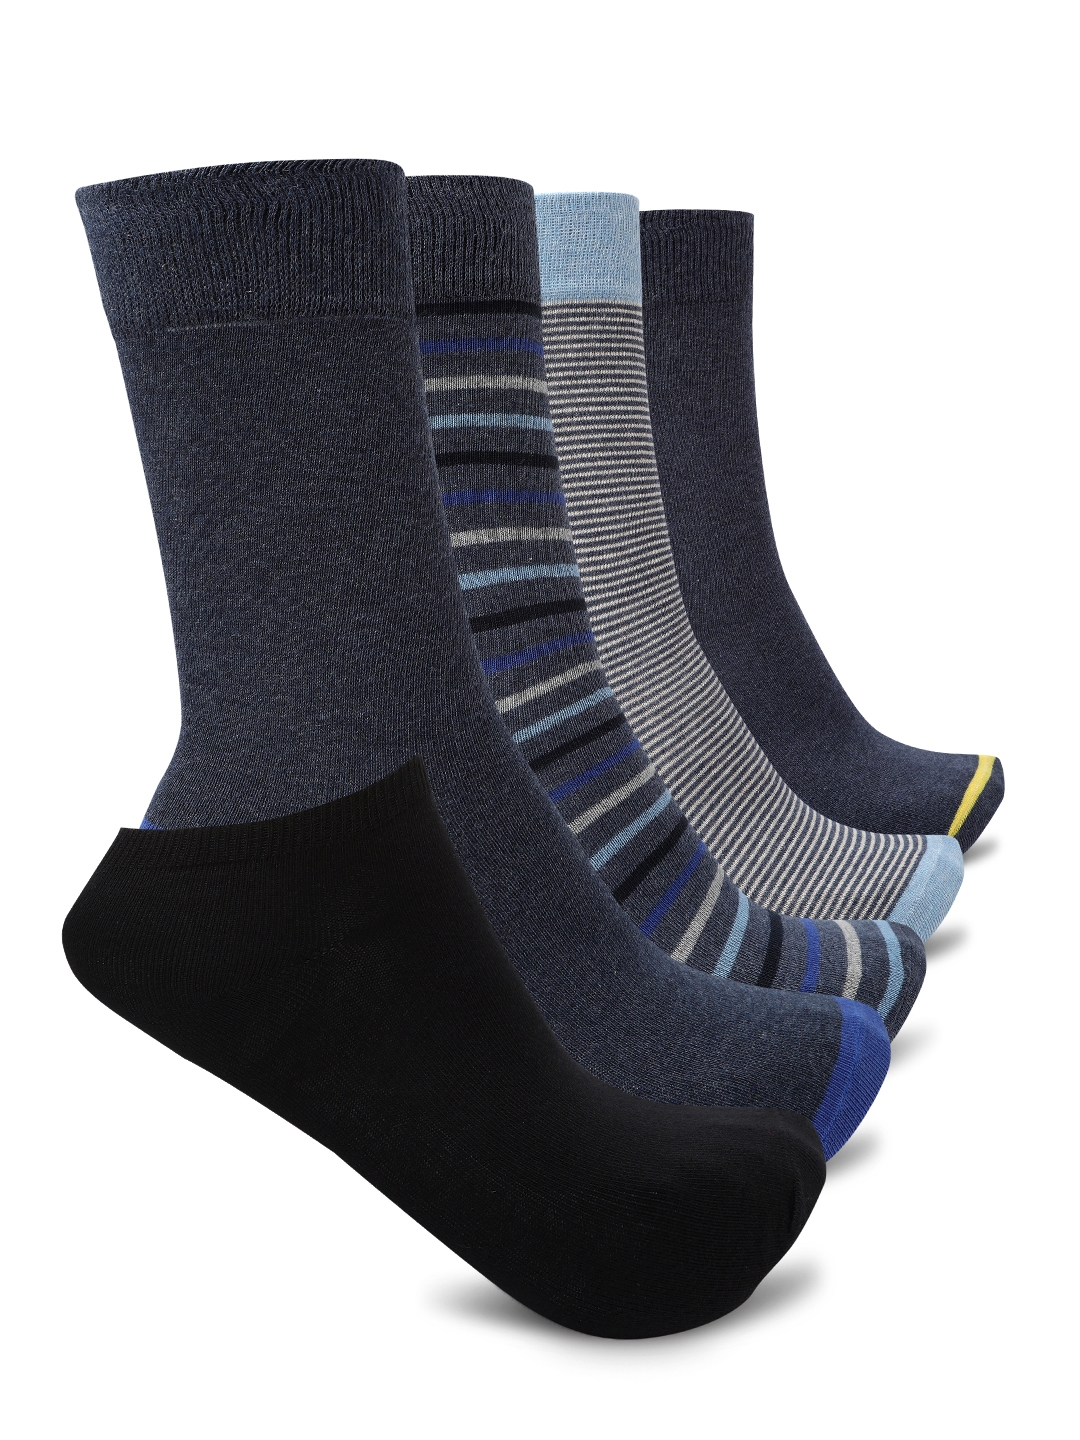 Smarty Pants | Smarty Pants men's pack of 5 solid and printed cotton socks.  0